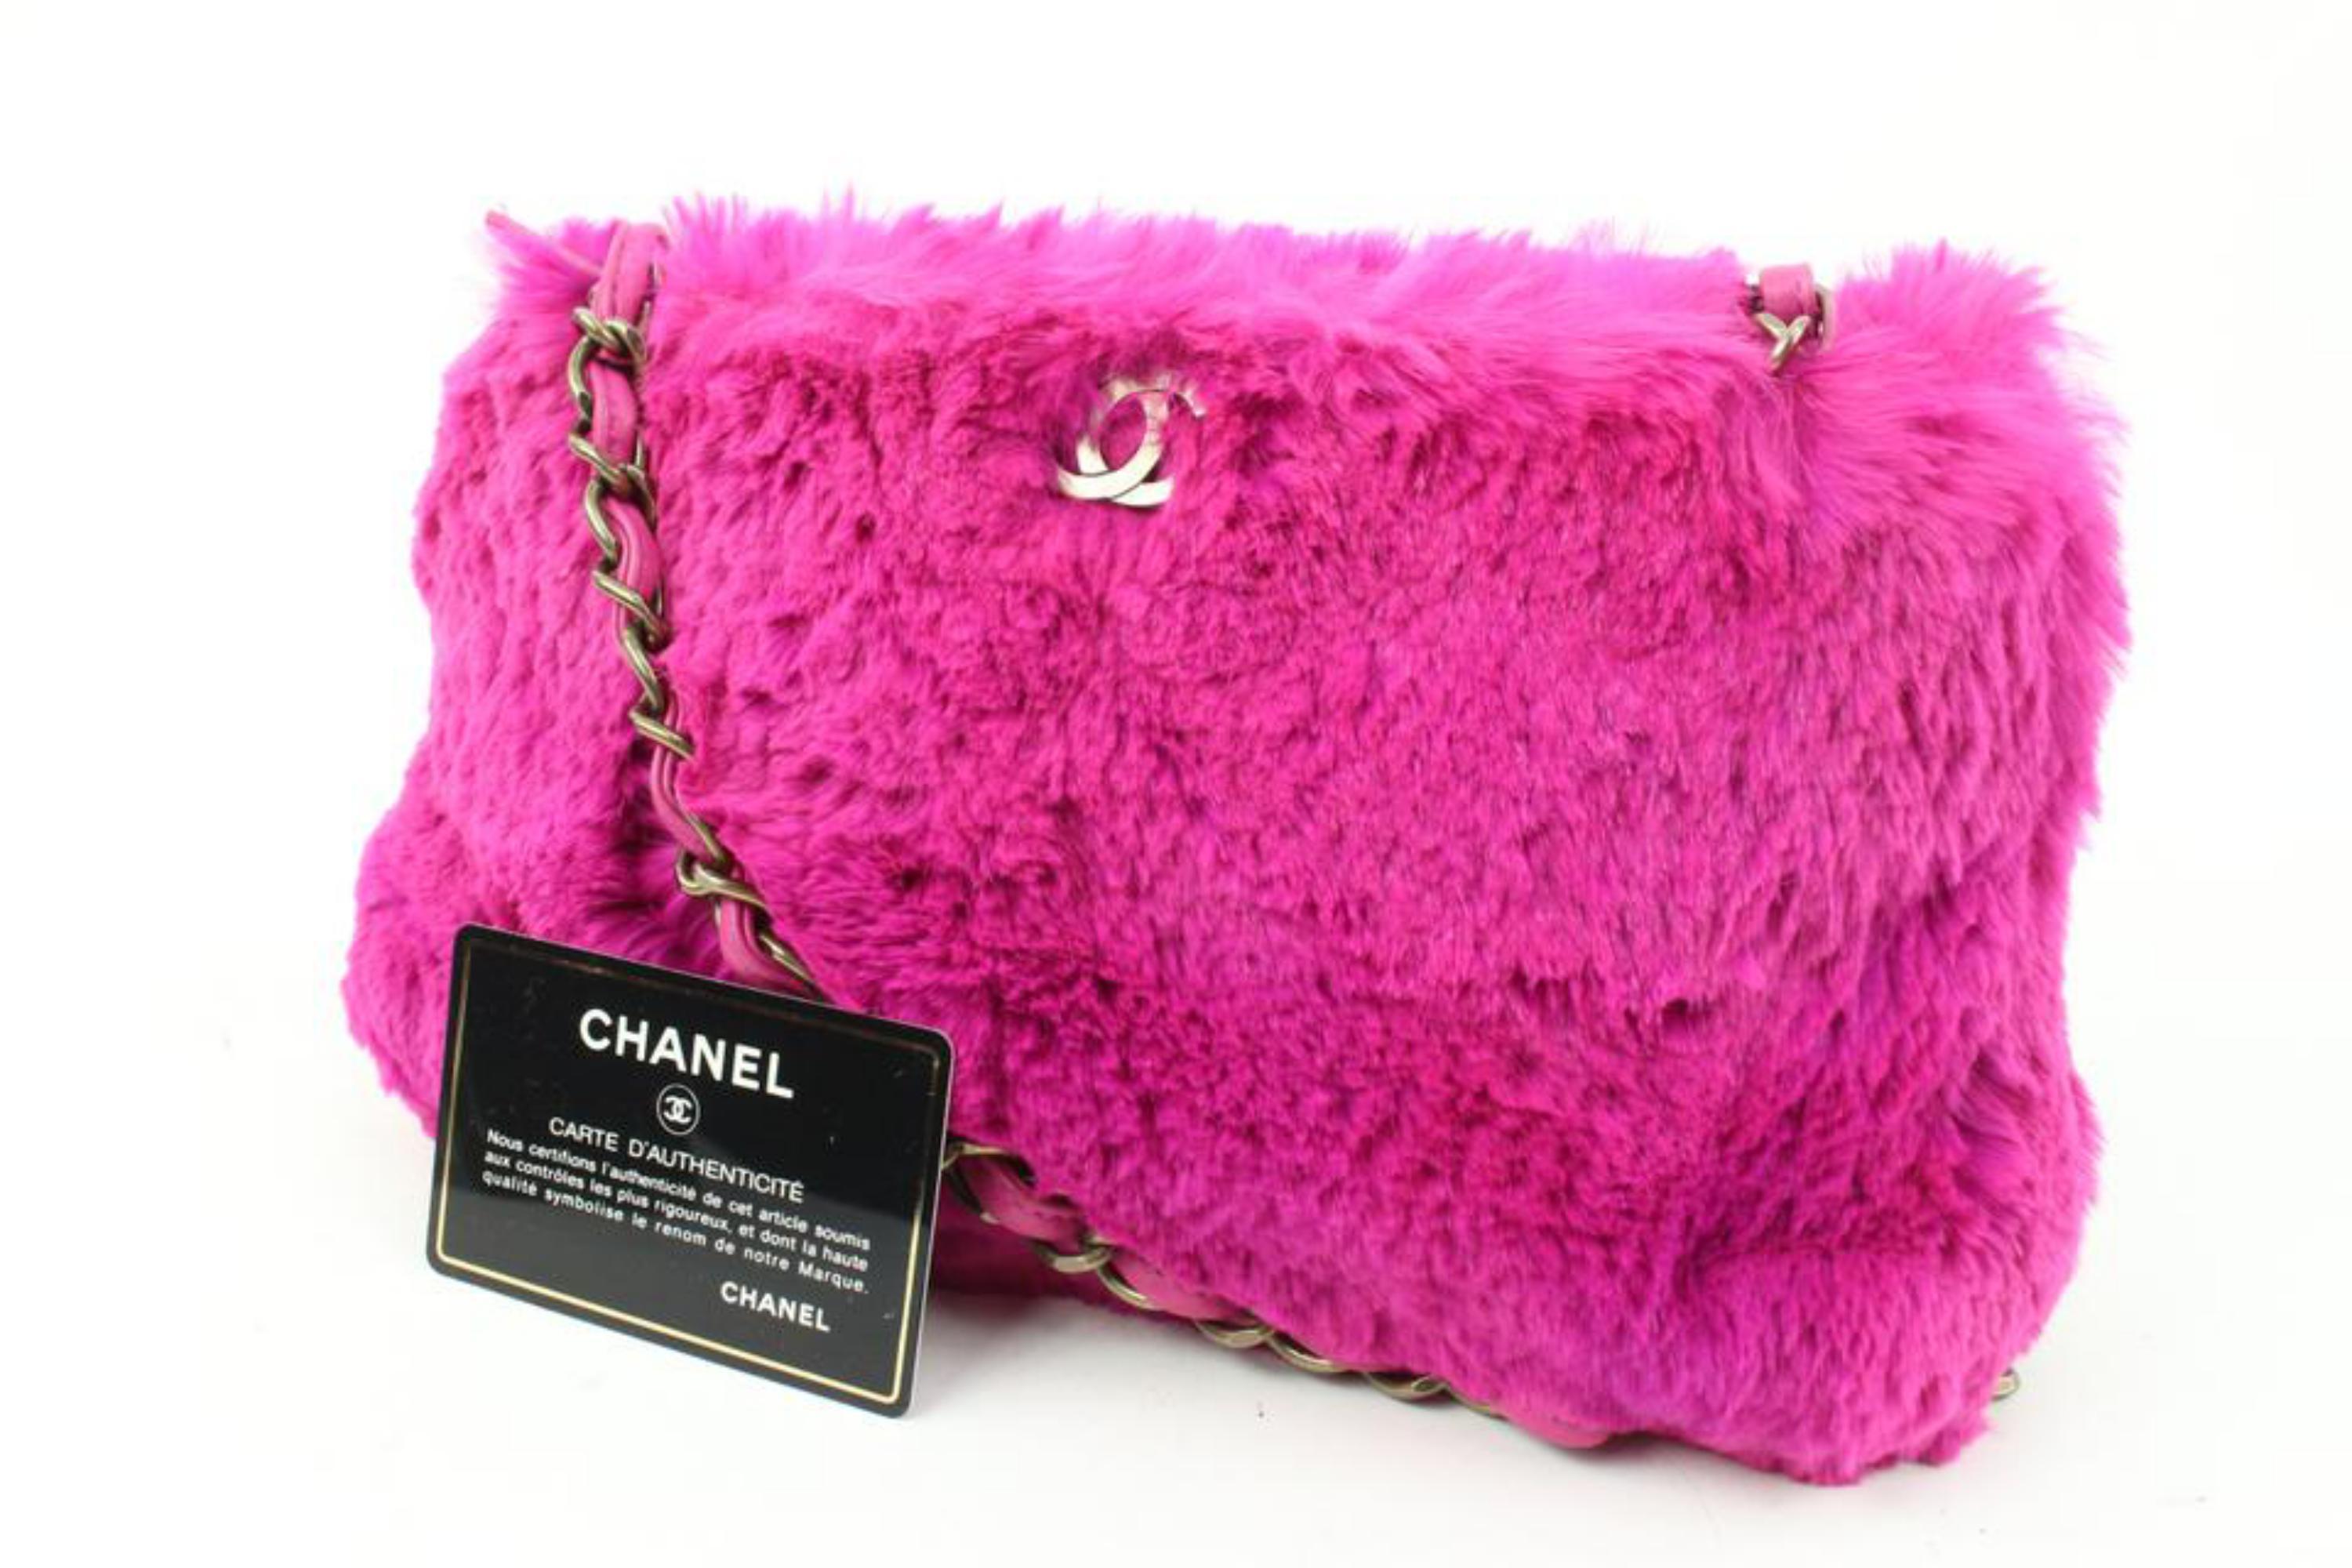 Chanel Fuchsia Pink Rabbit Fur Chain Shoulder Bag 57c128s
Date Code/Serial Number: 6191531
Made In: Italy
Measurements: Length:  10.5